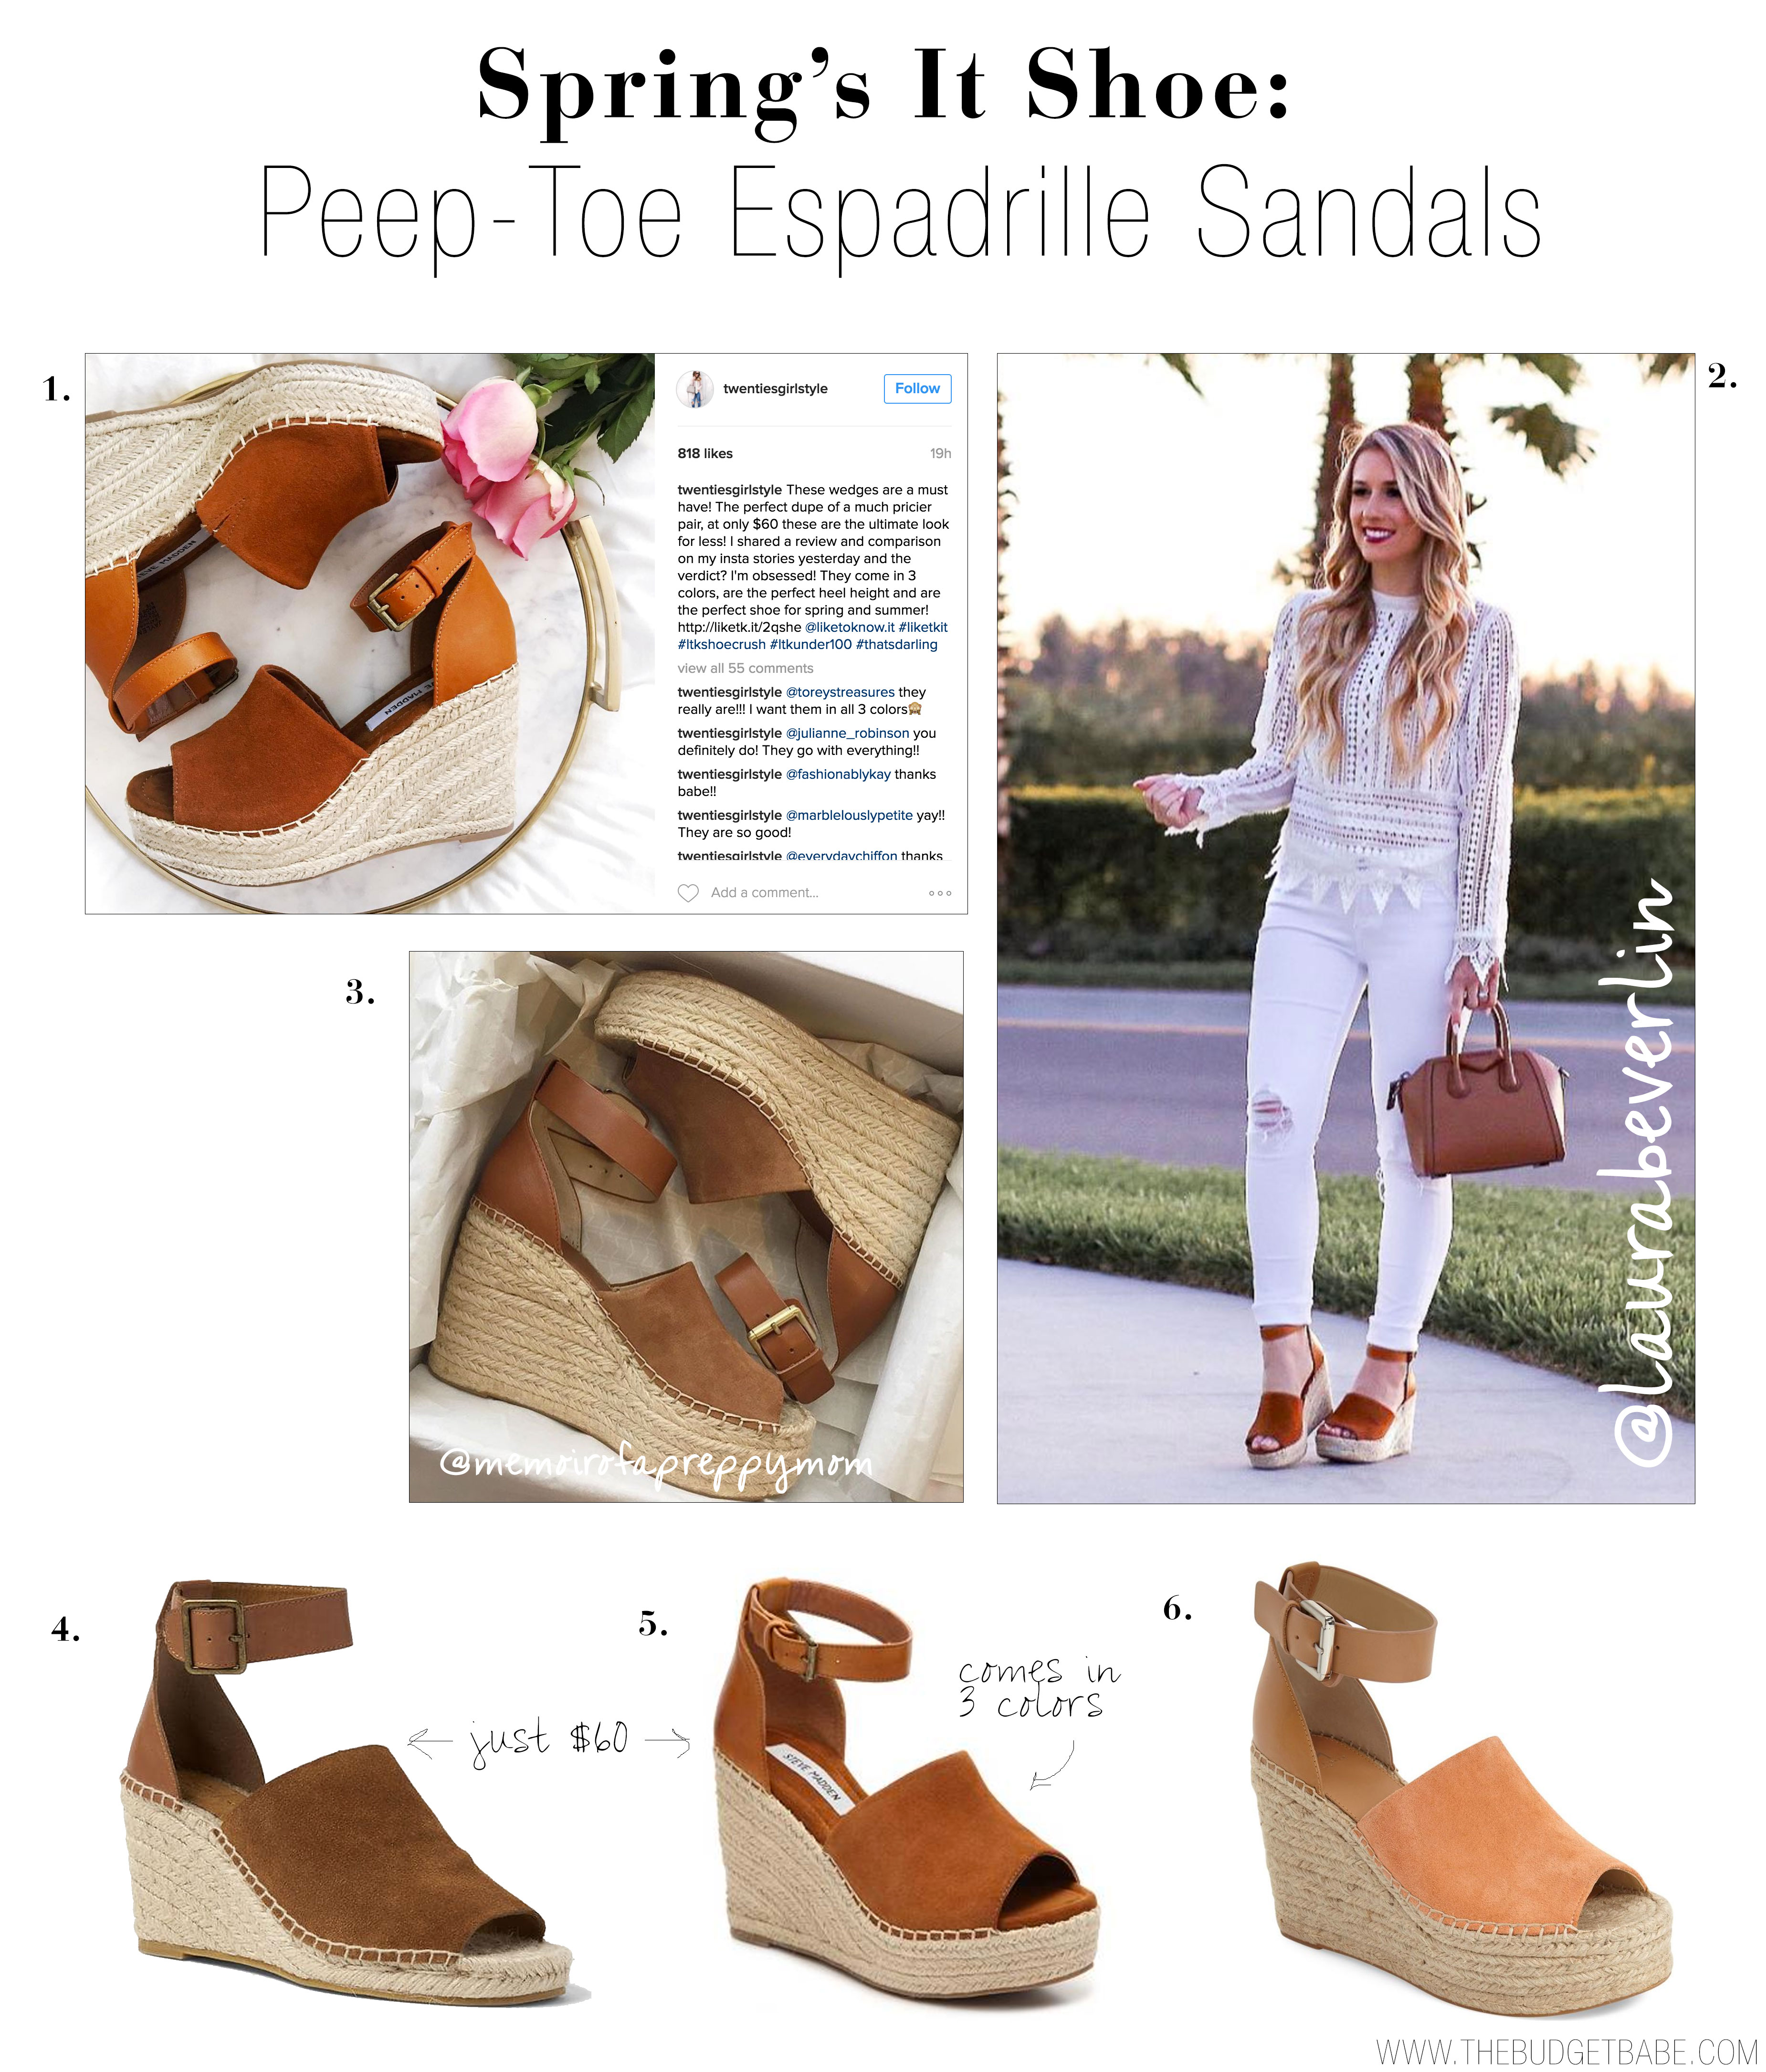 Spring's It Shoe: Peep Toe Espadrille Wedge" alt="Spring's it shoe looks like it's going to be a peep-toe espadrille sandal with a chic and functional ankle strap.